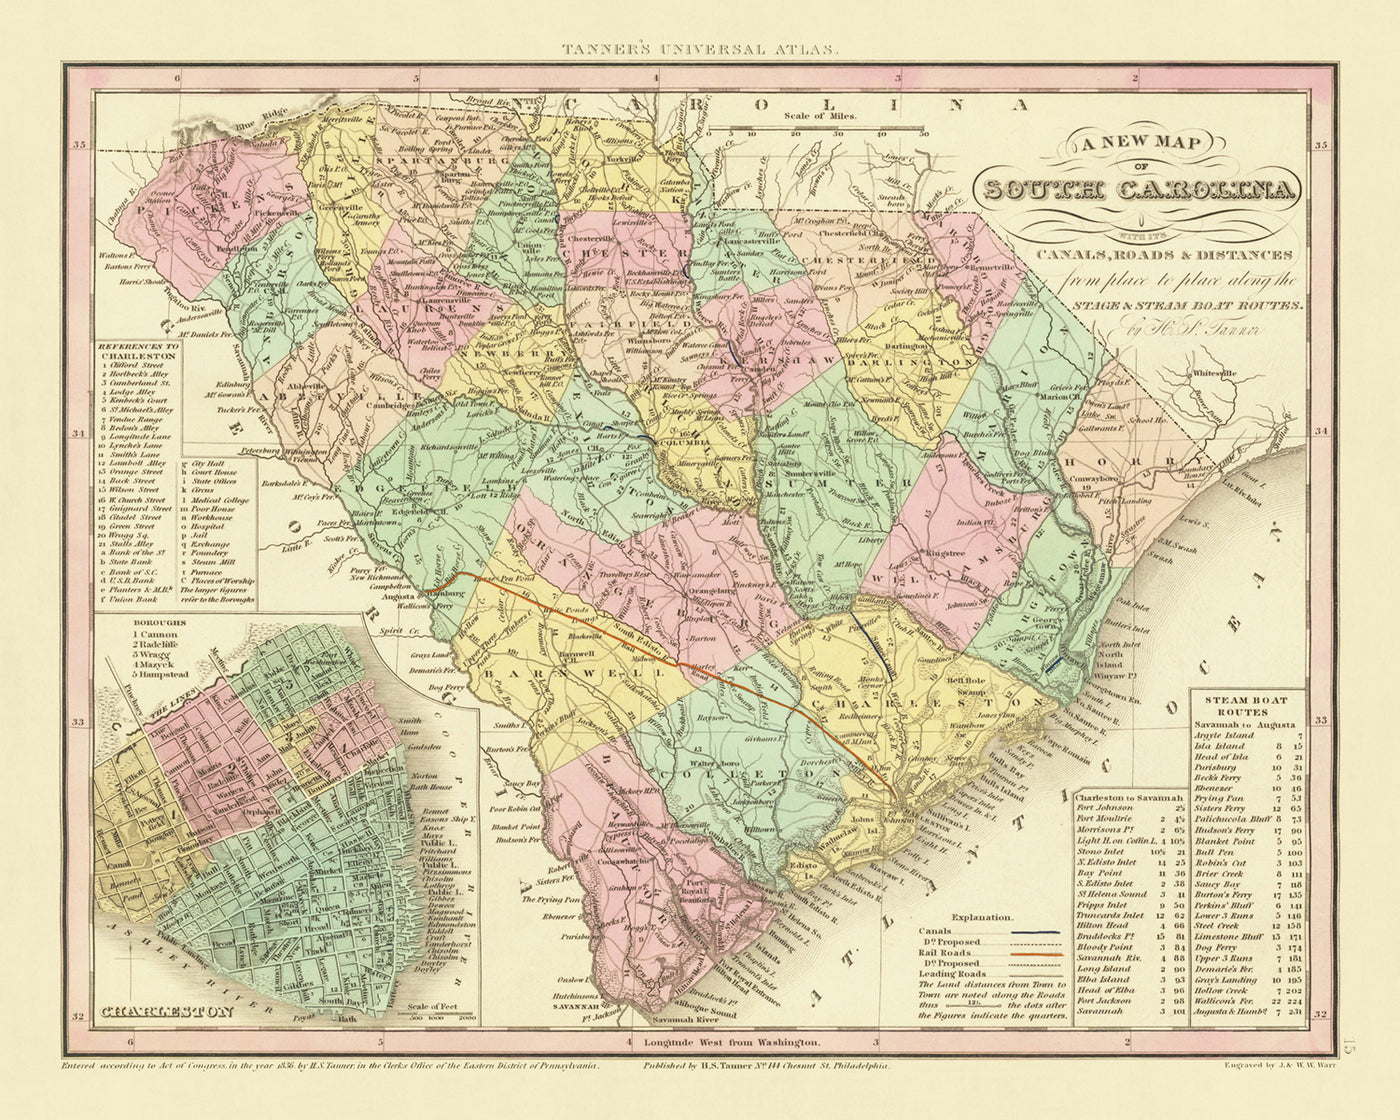 Old Map of South Carolina by Tanner, 1836: Charleston, Columbia, Camden, Georgetown, and Beaufort